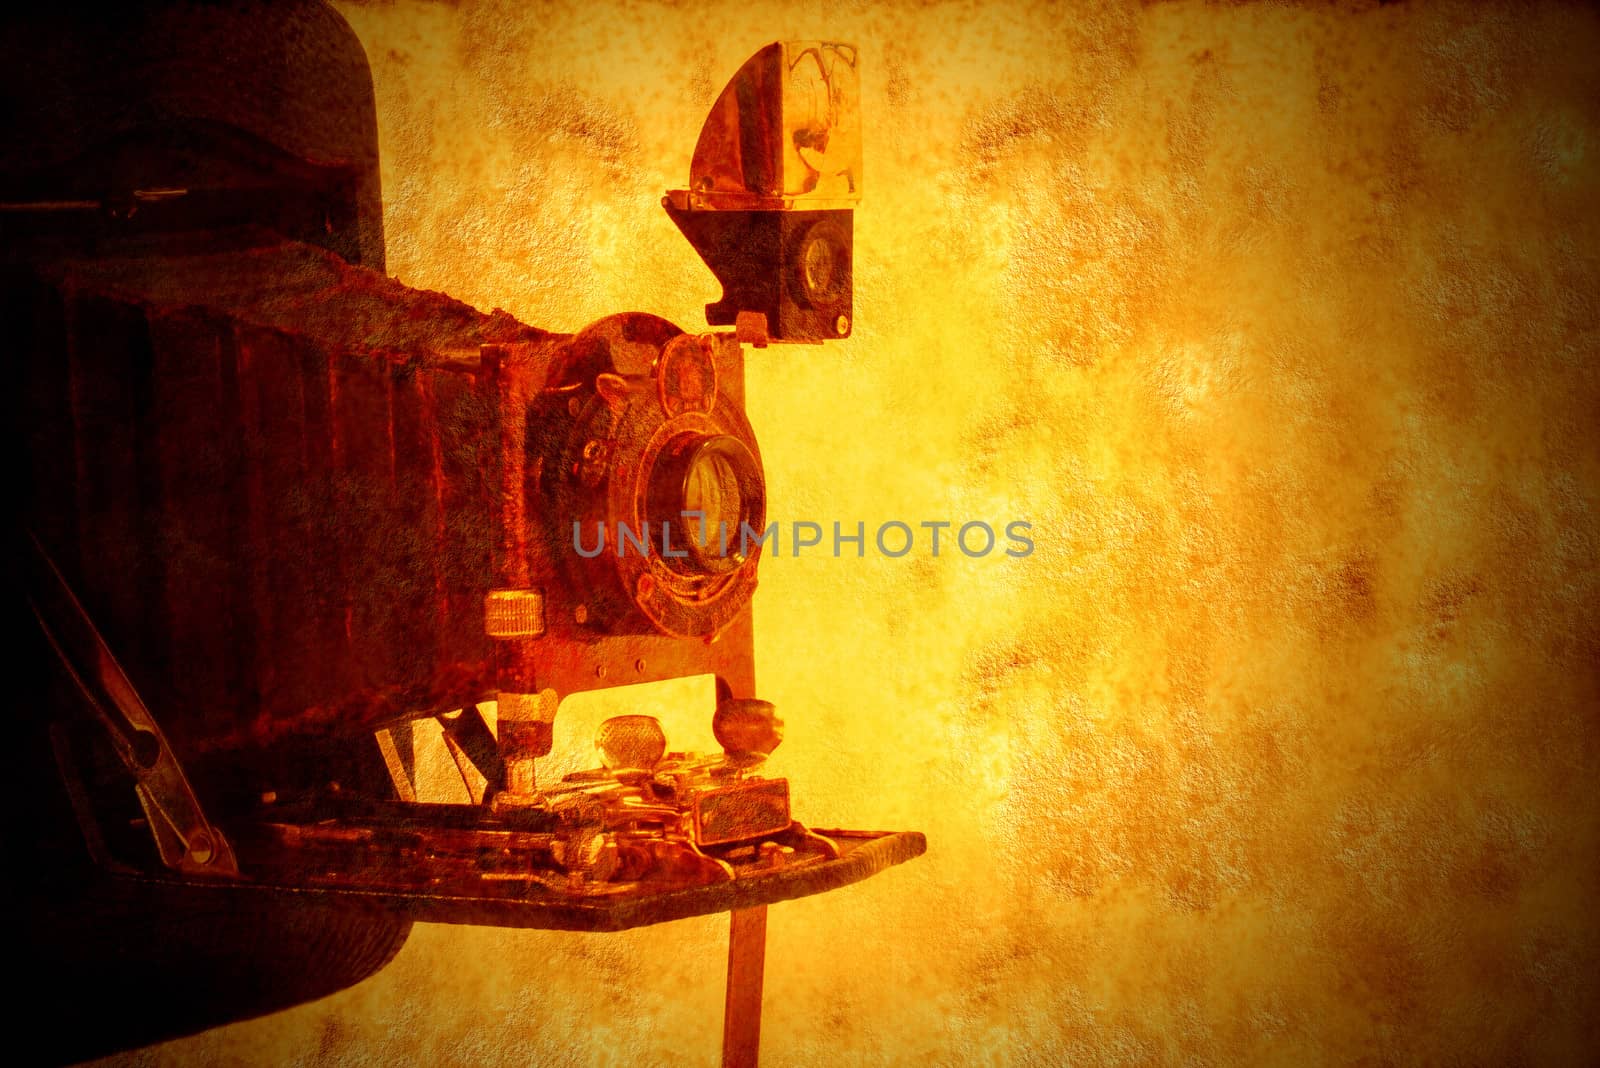 Background image vintage bellows style camera and copy space for text